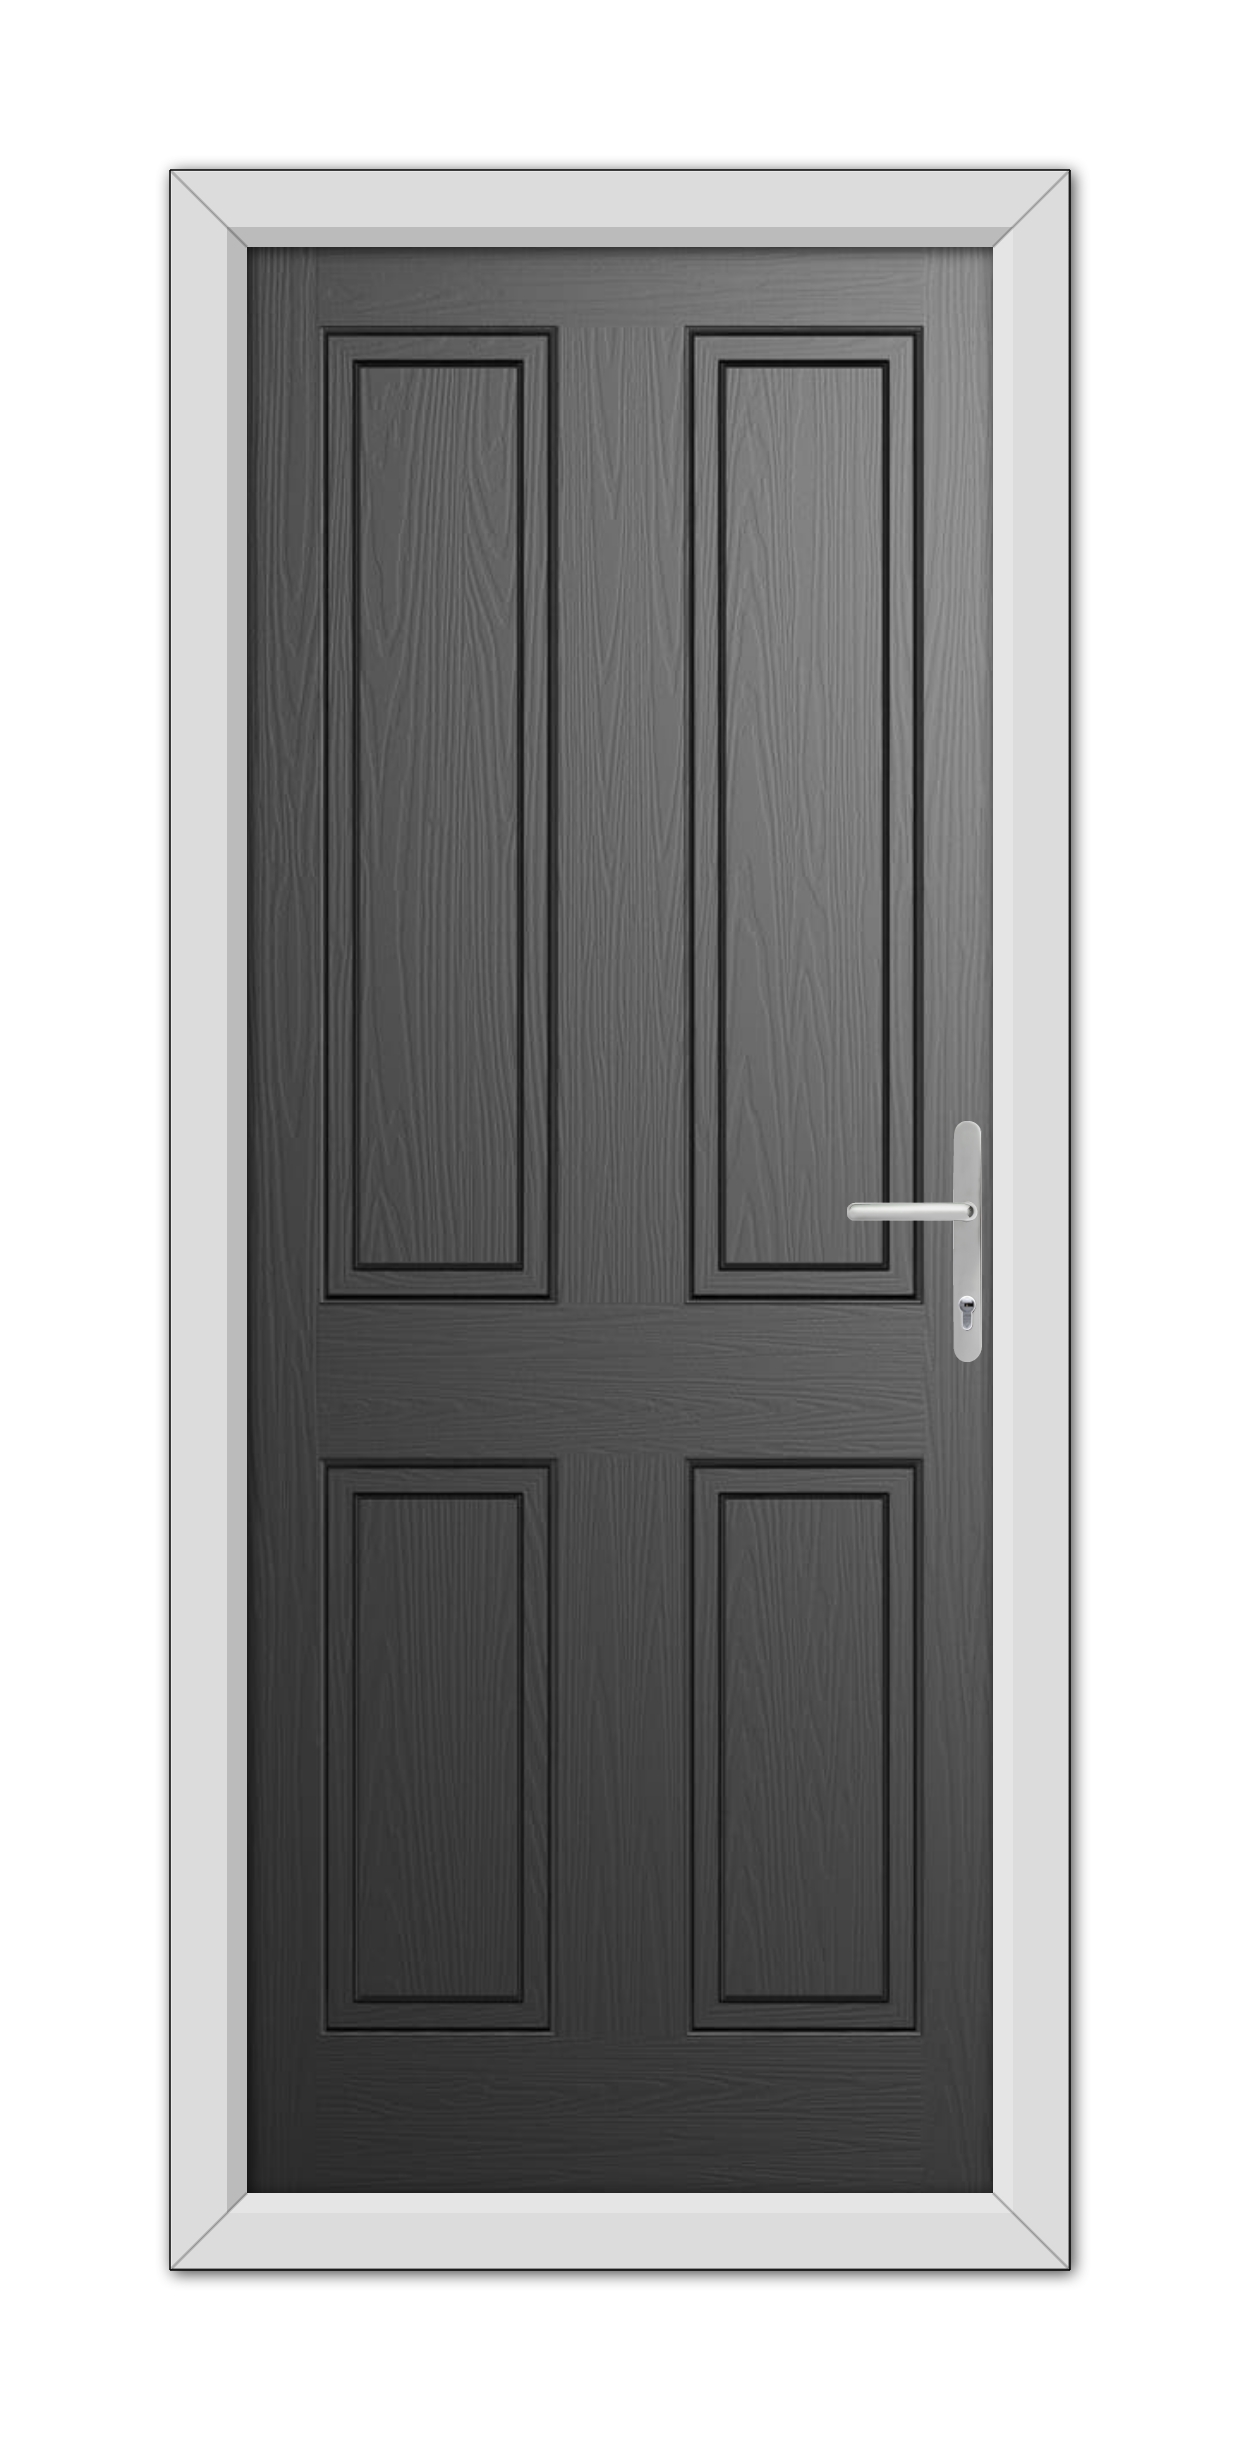 A modern, Black Whitmore Solid Composite Door 48mm Timber Core with four panels and a silver handle, set within a white frame.